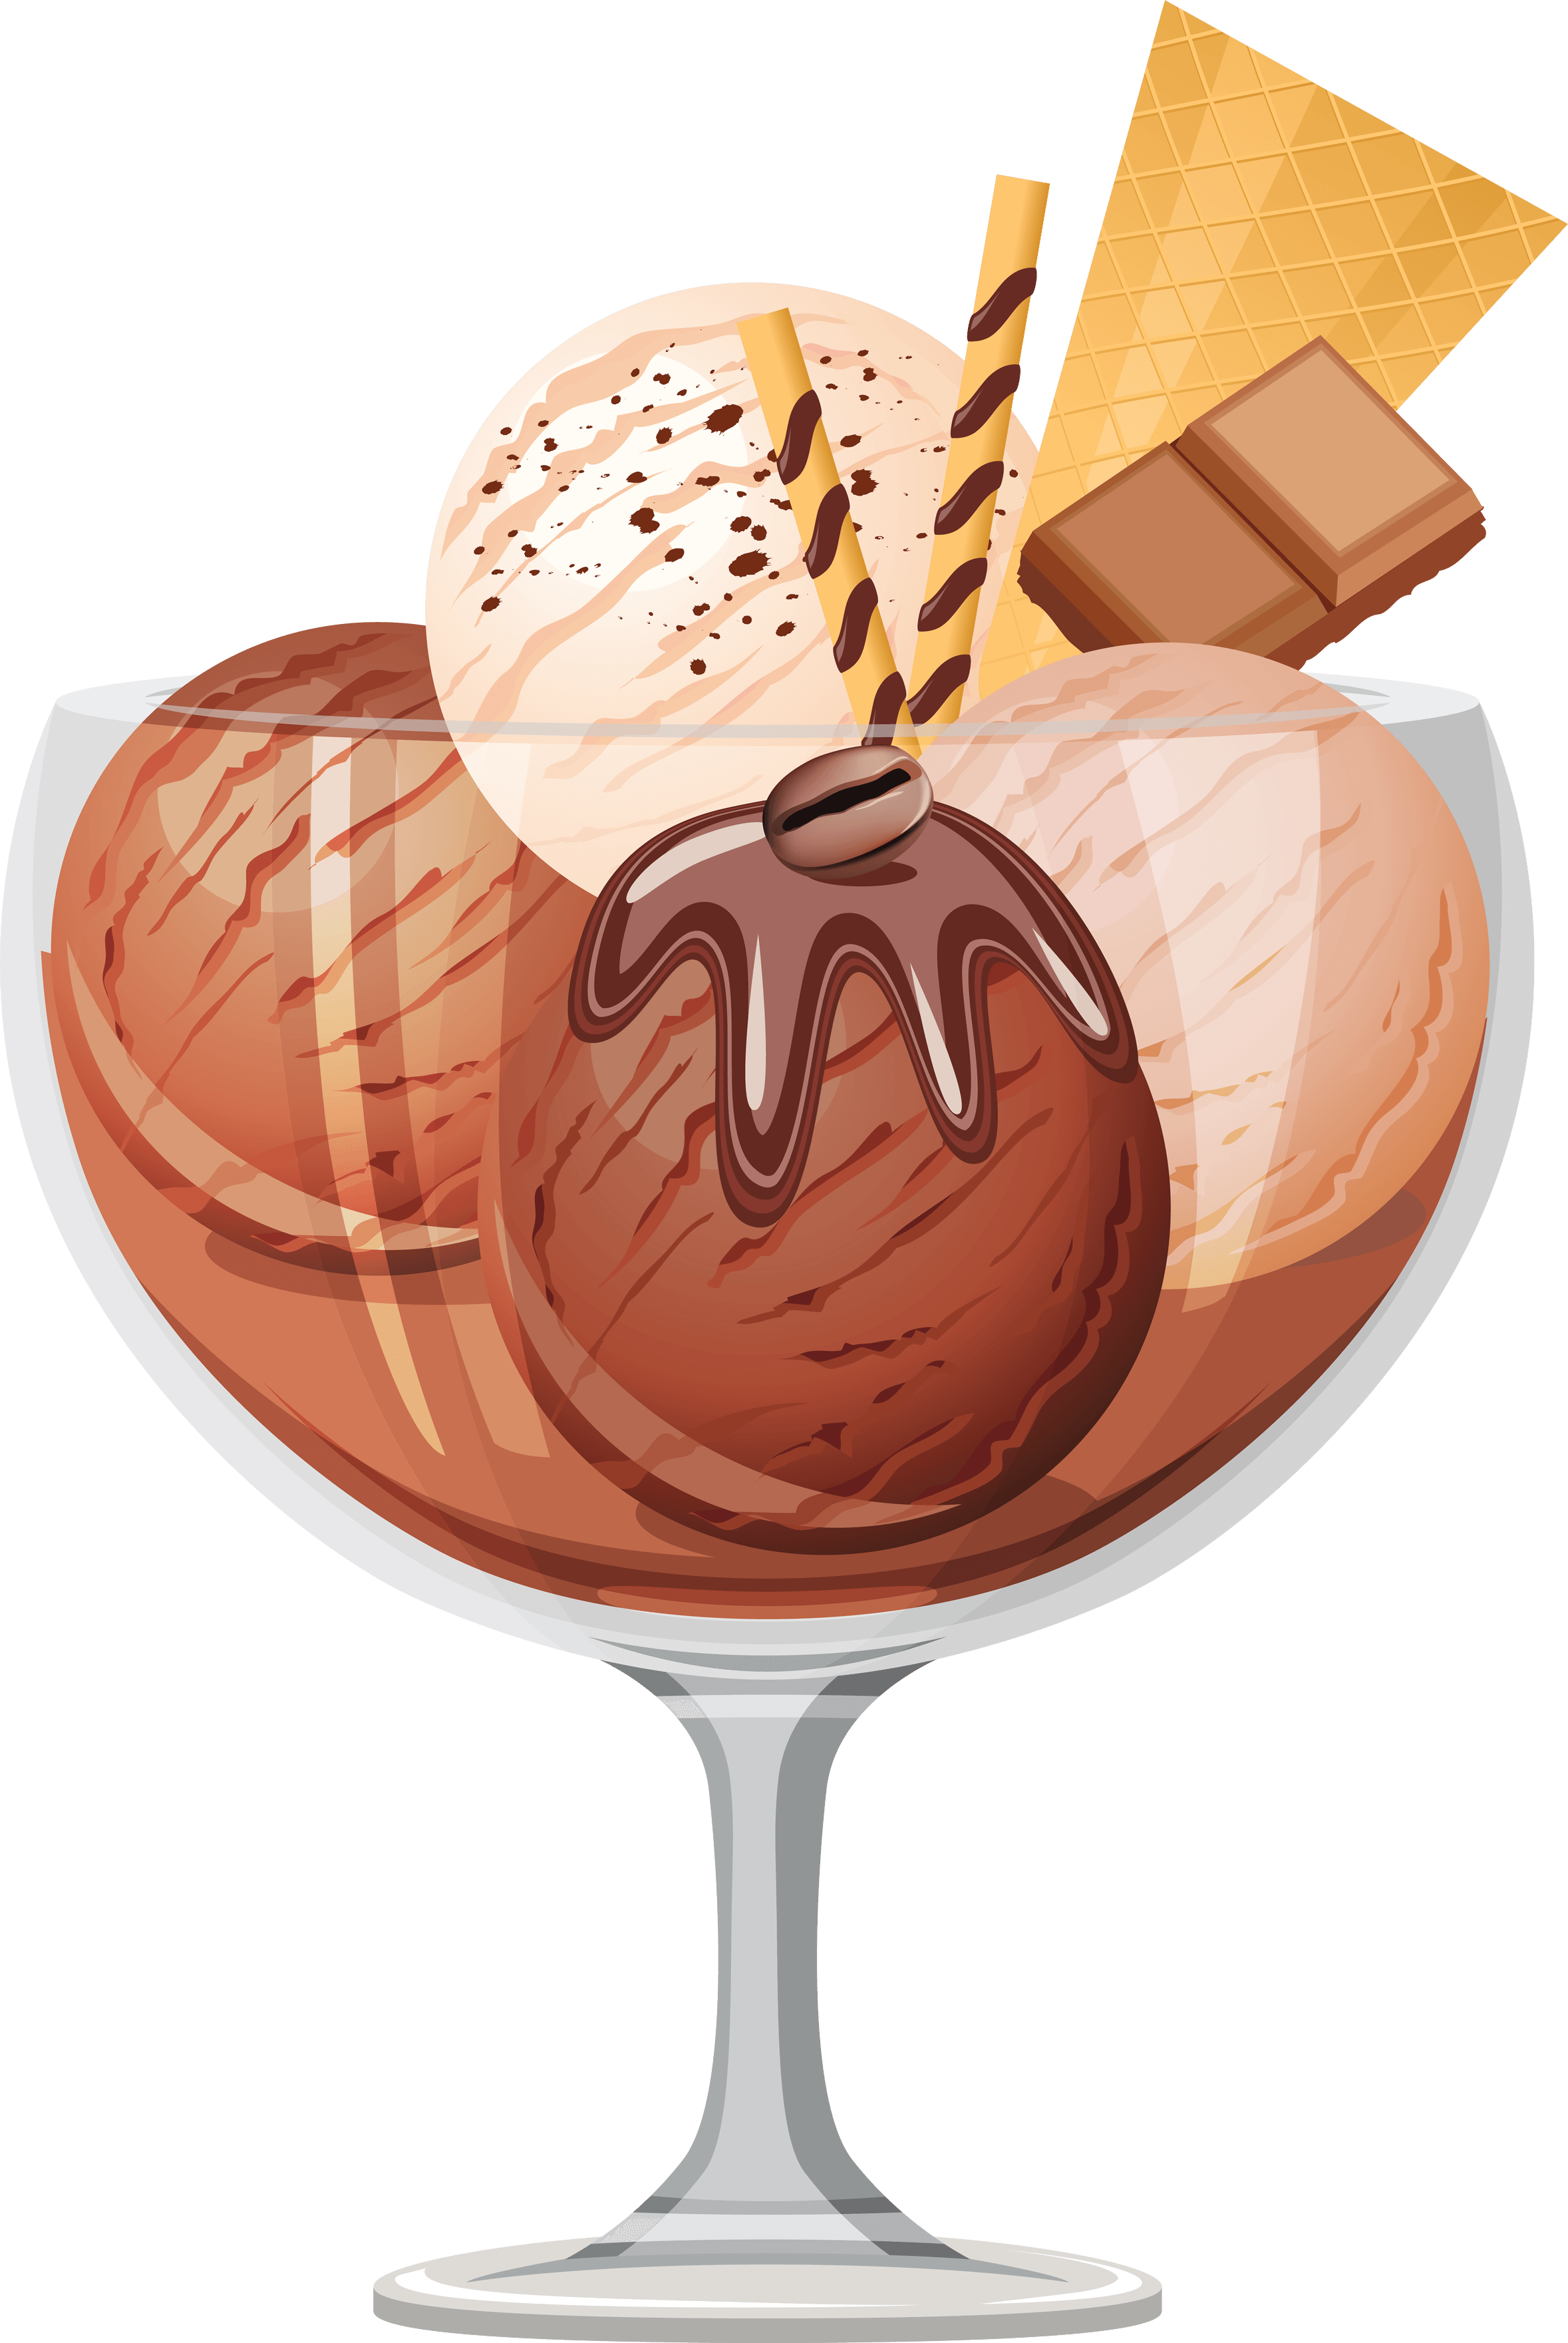 Chocolate Ice Cream Png Image PNG Image